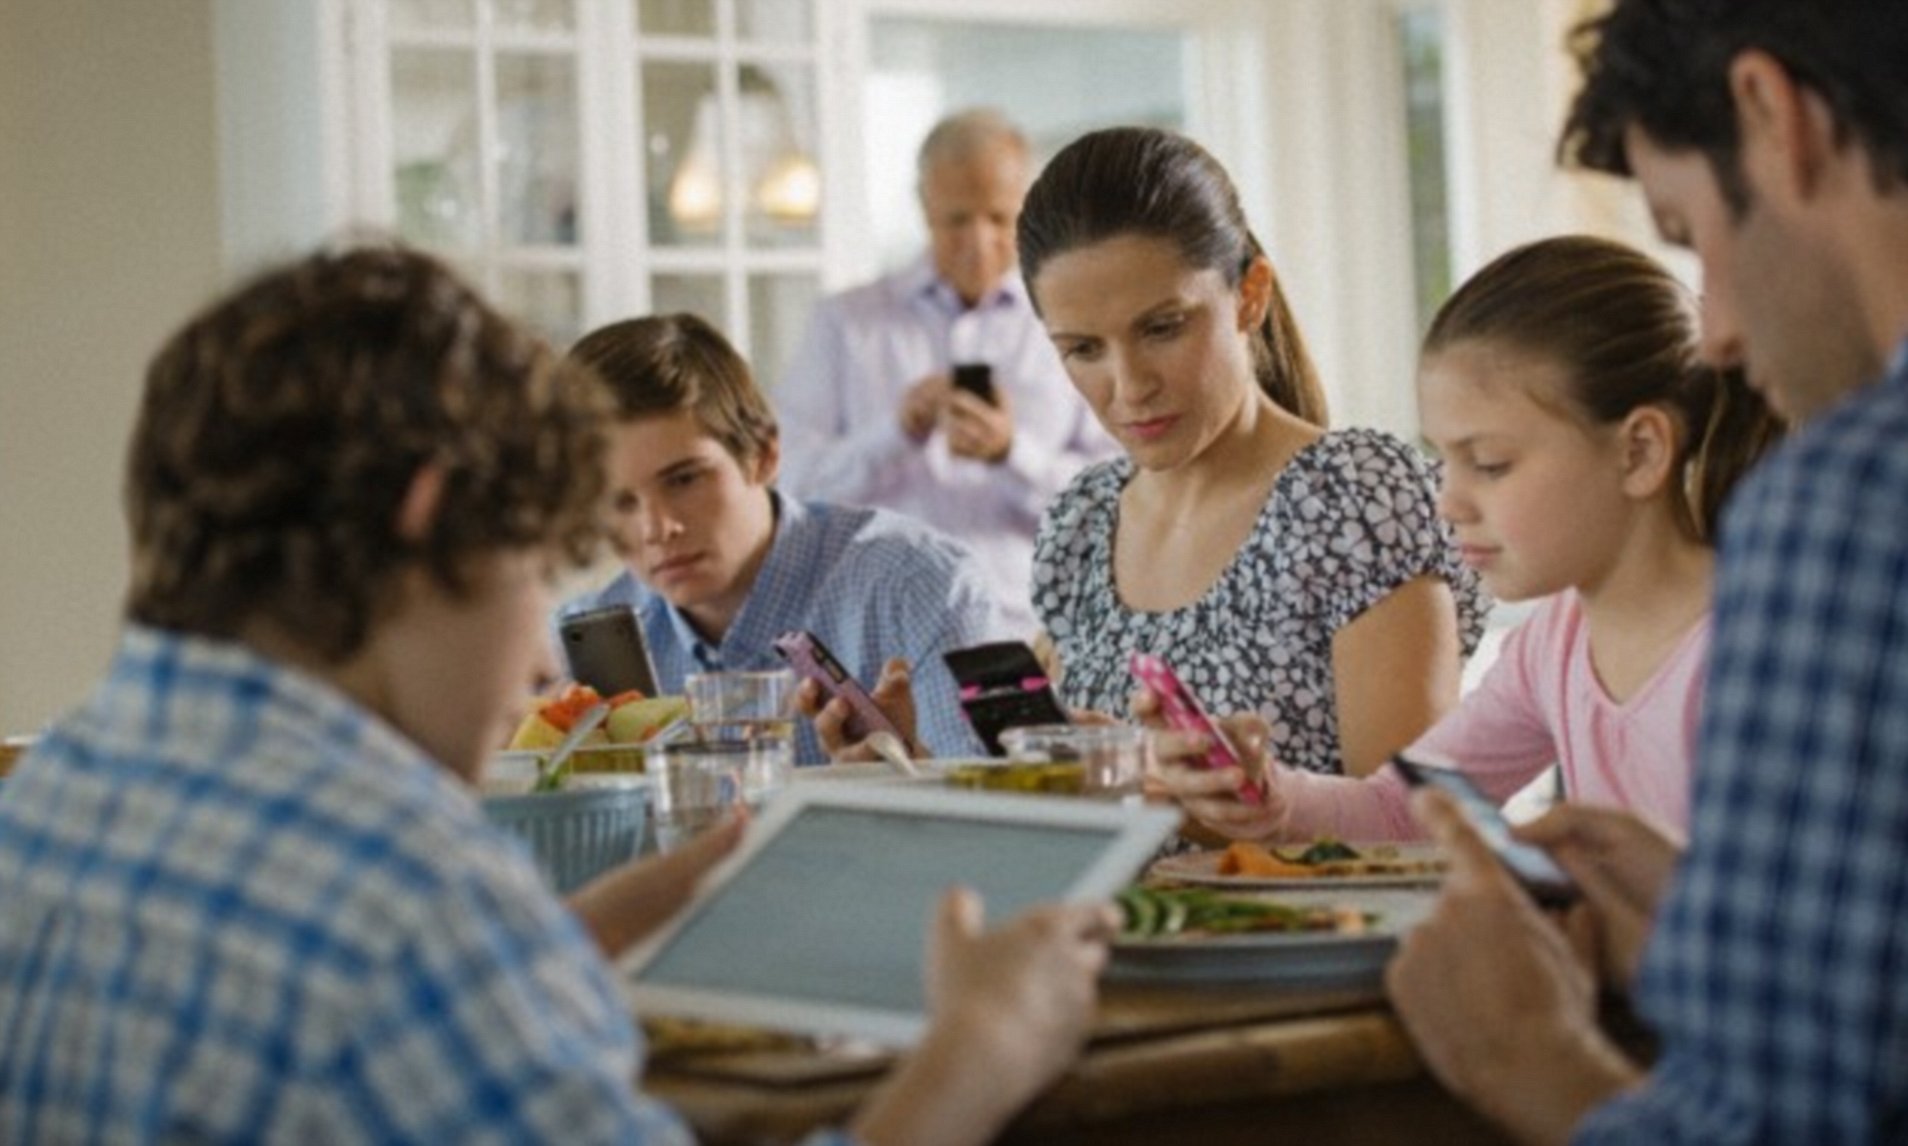 Everyone is busy with their phones and other devices during a family meal